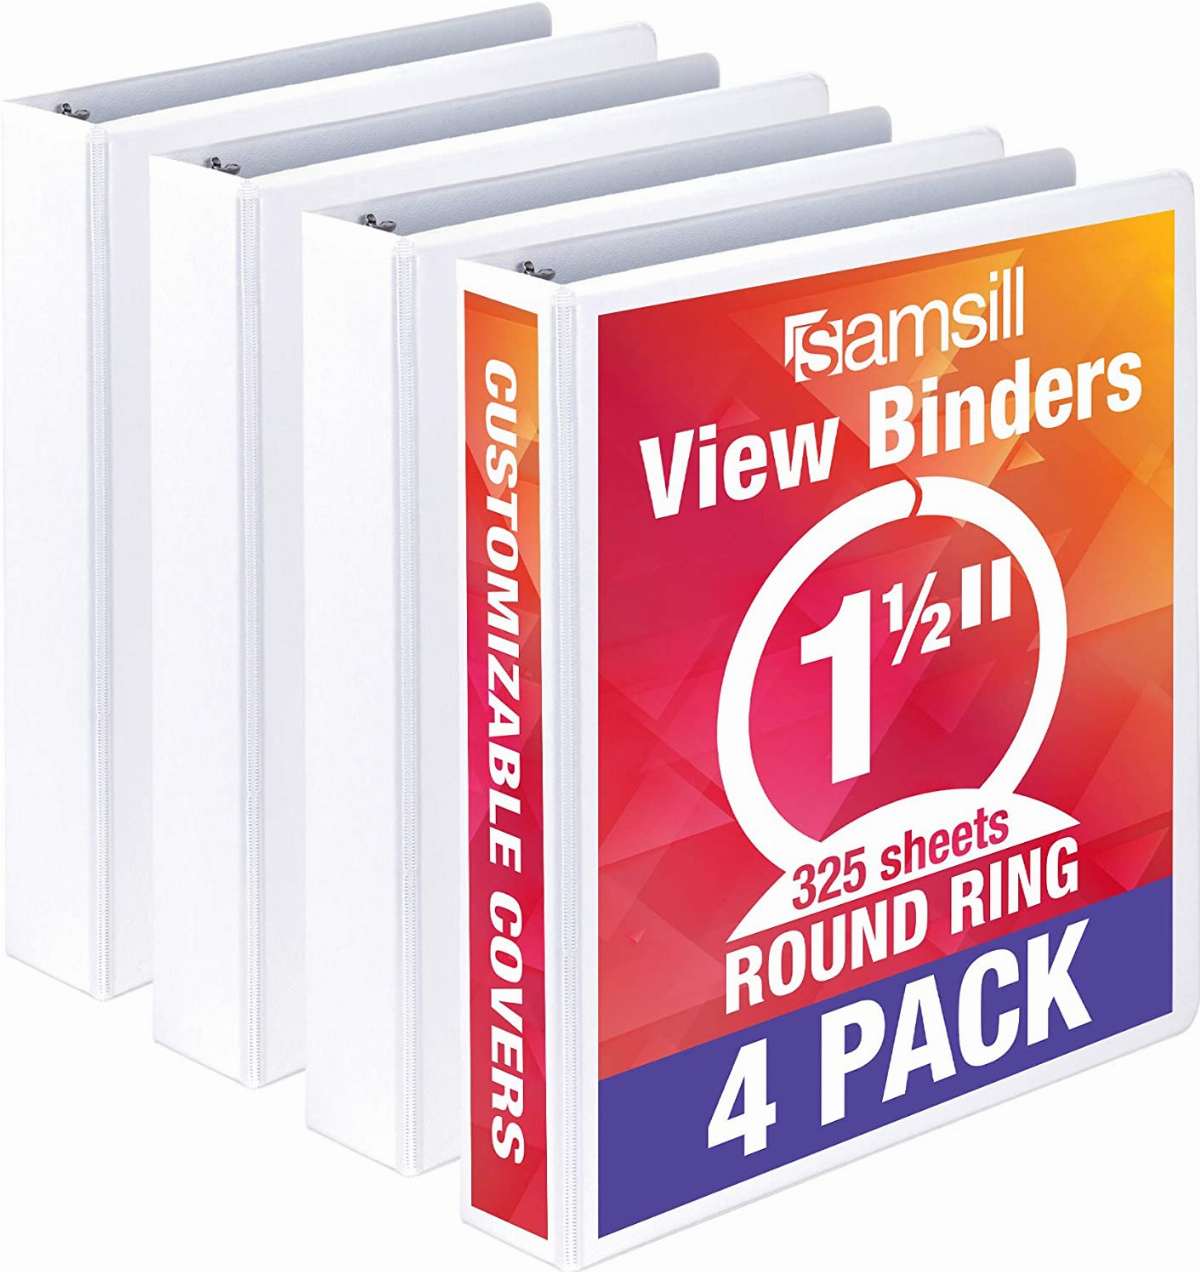 Holds 350 Sheets 79550 Assorted Colors Round Rings Cardinal 3 Ring Binders 4 Pack ClearVue Presentation View Non-Stick 1.5 Inch